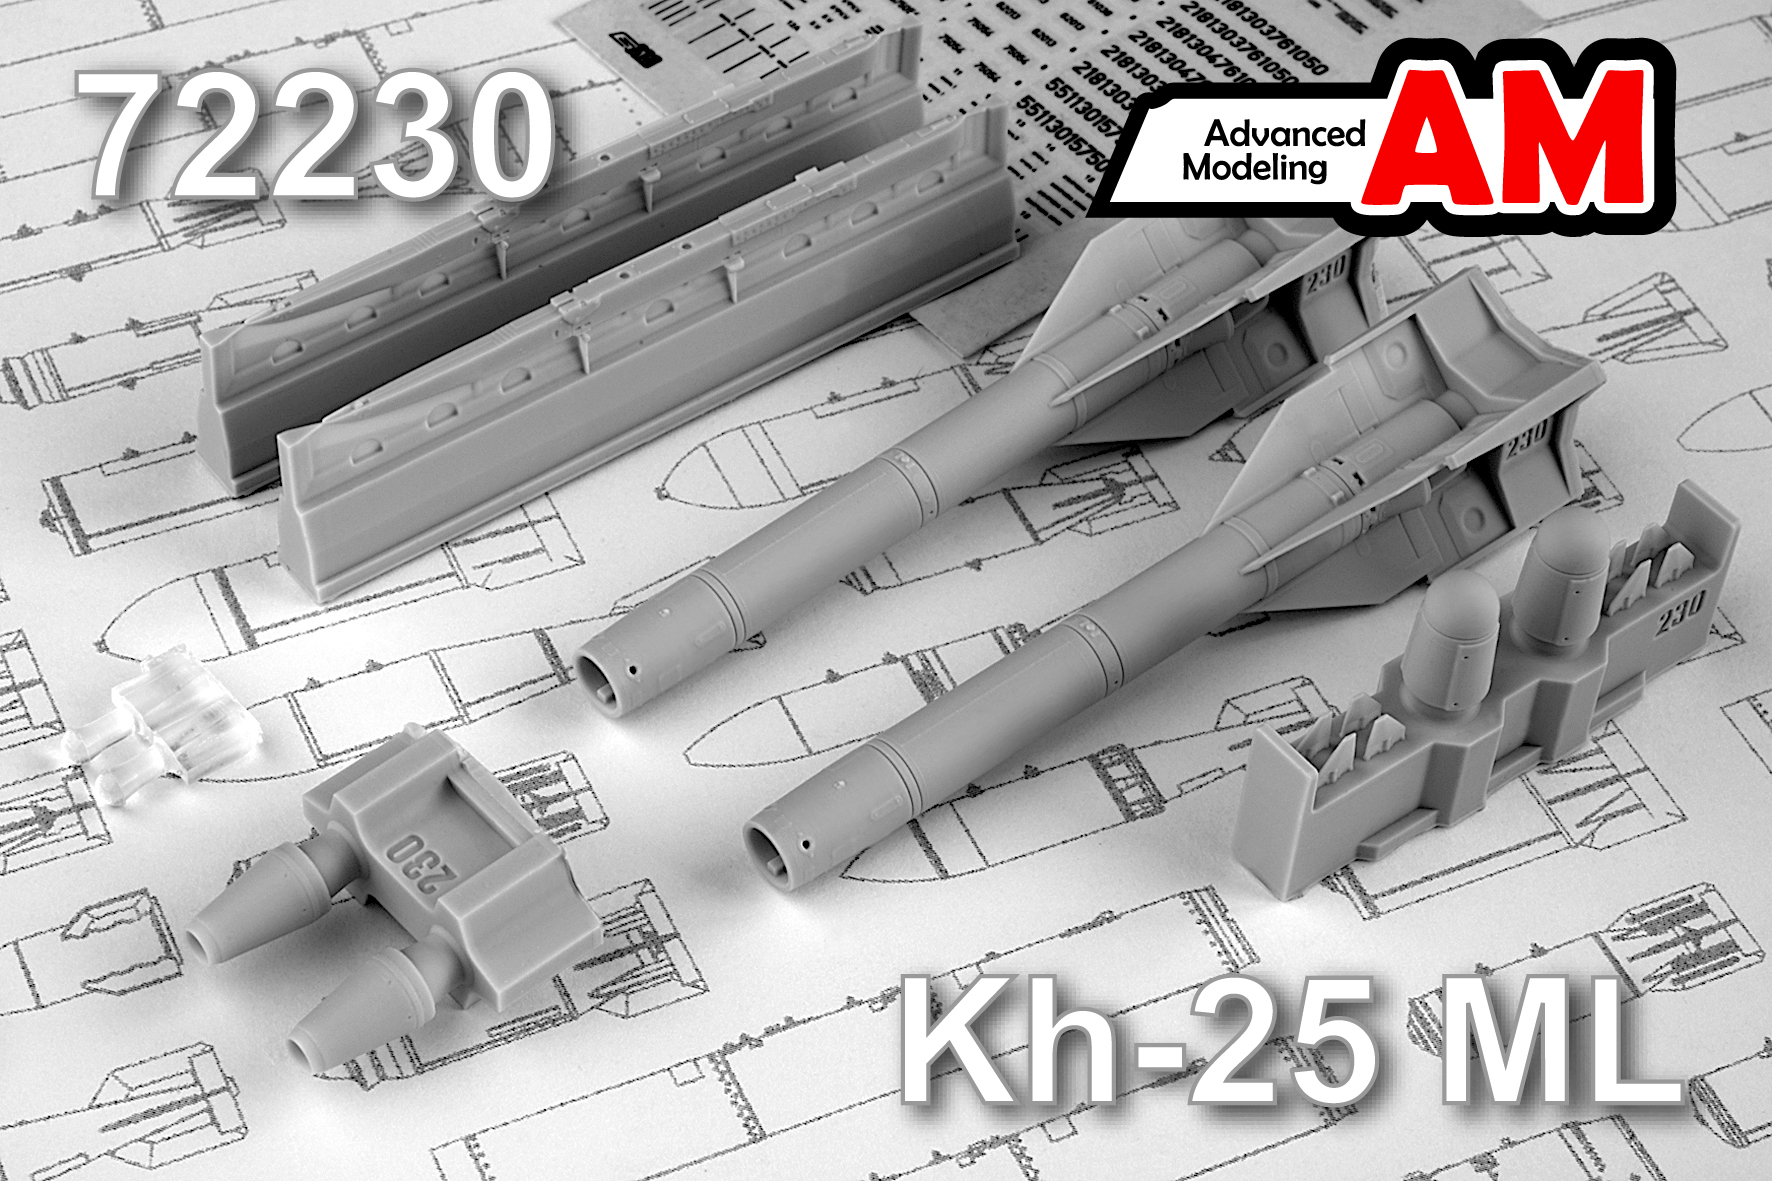 Additions (3D resin printing) 1/72 Aircraft guided missile Kh-25ML with launcher APU-68UM2 (Advanced Modeling) 